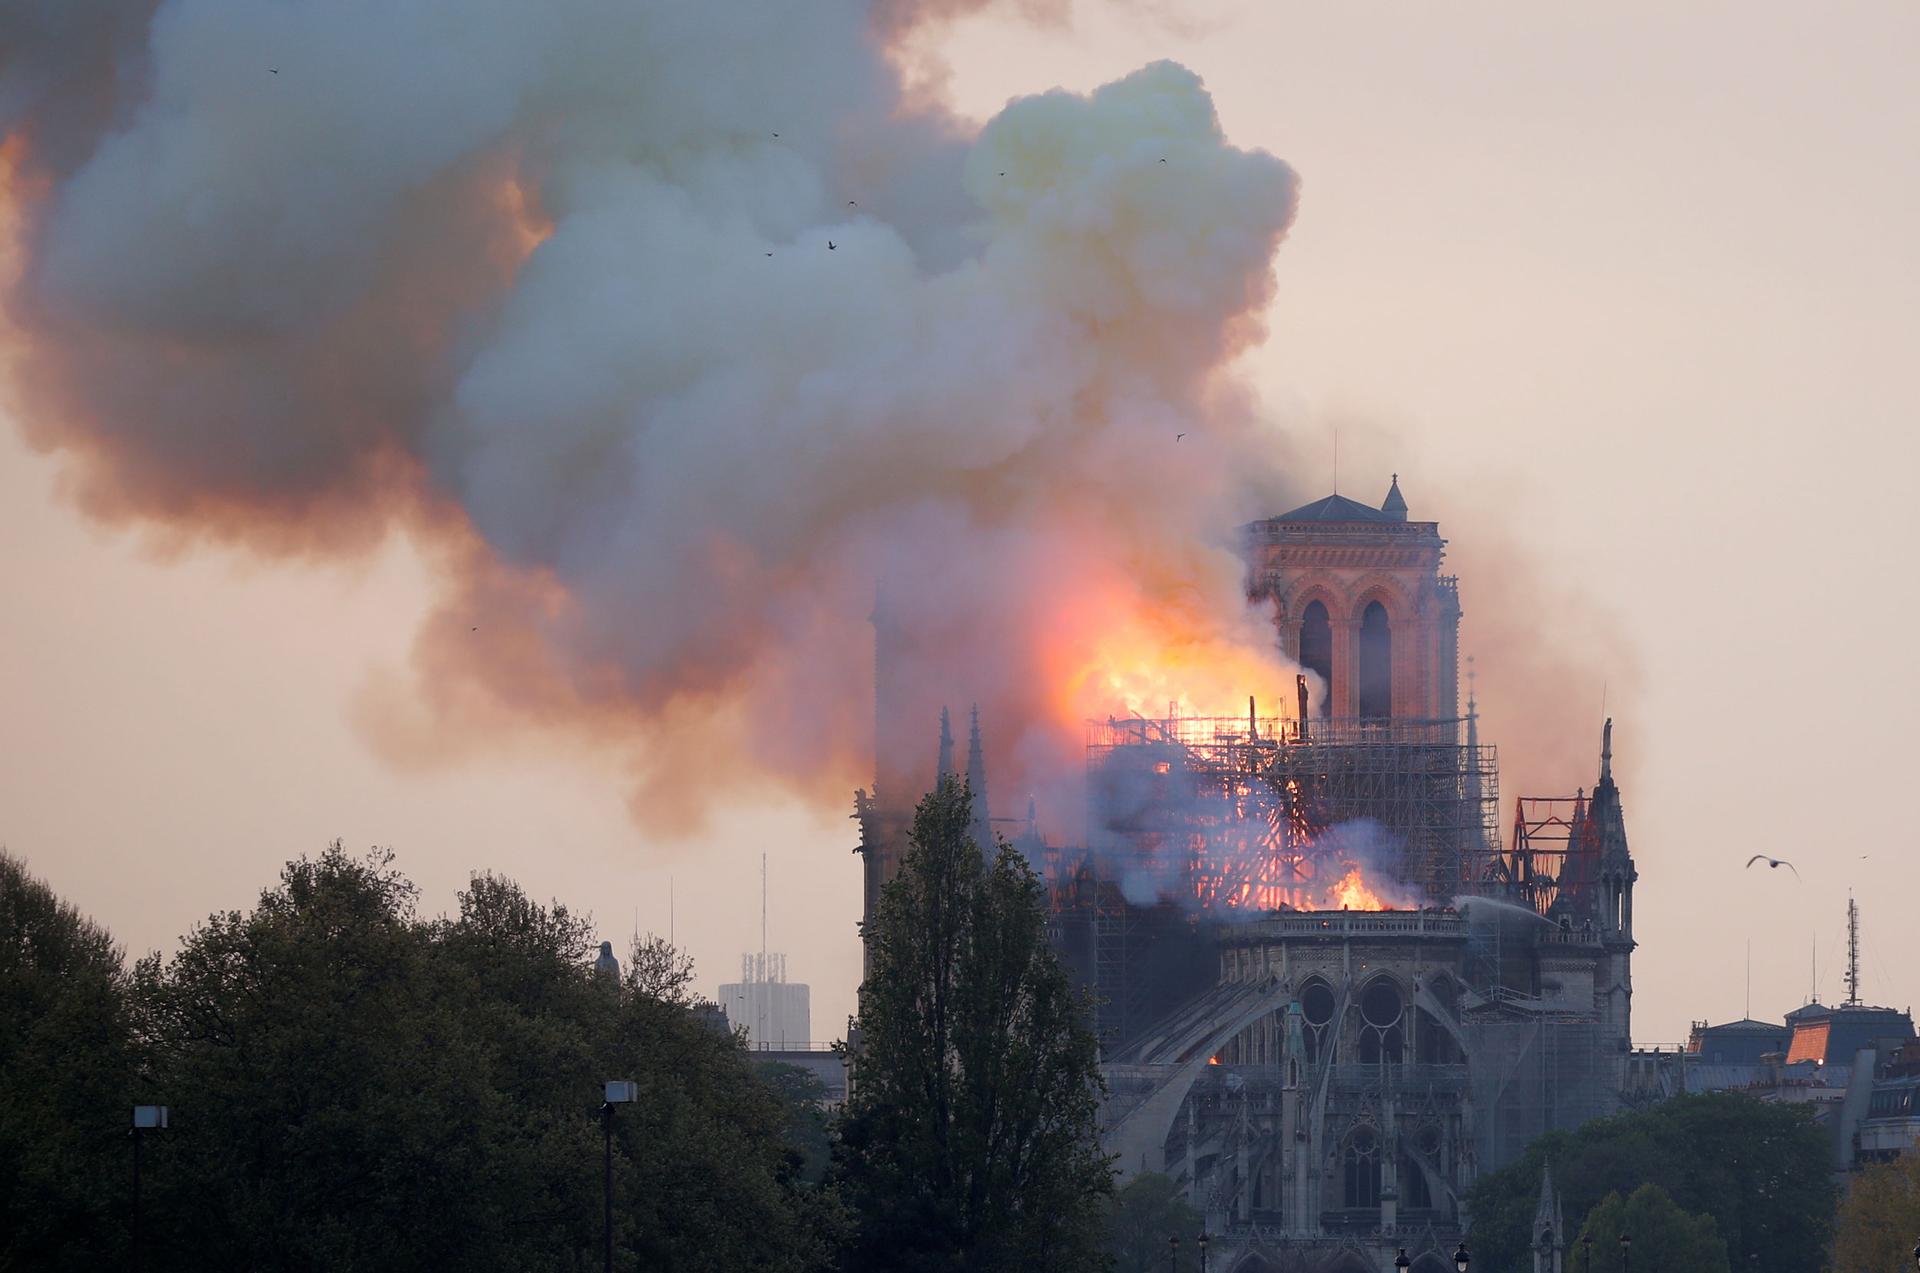 A photo shows the top of the Notre Dame cathedral on fire.